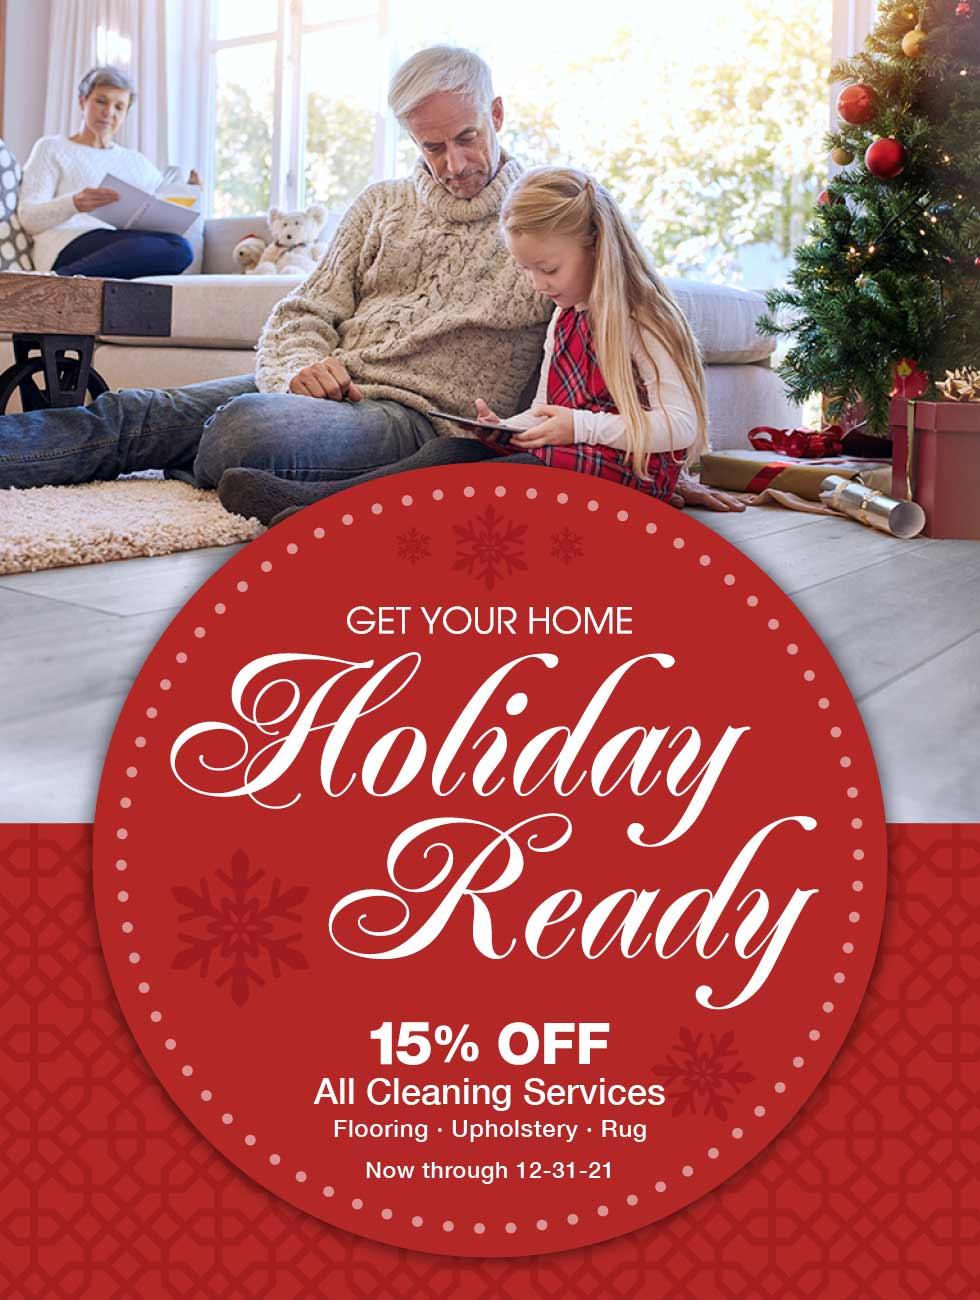 15% off all floor, upaholstery, and rug cleaning services.